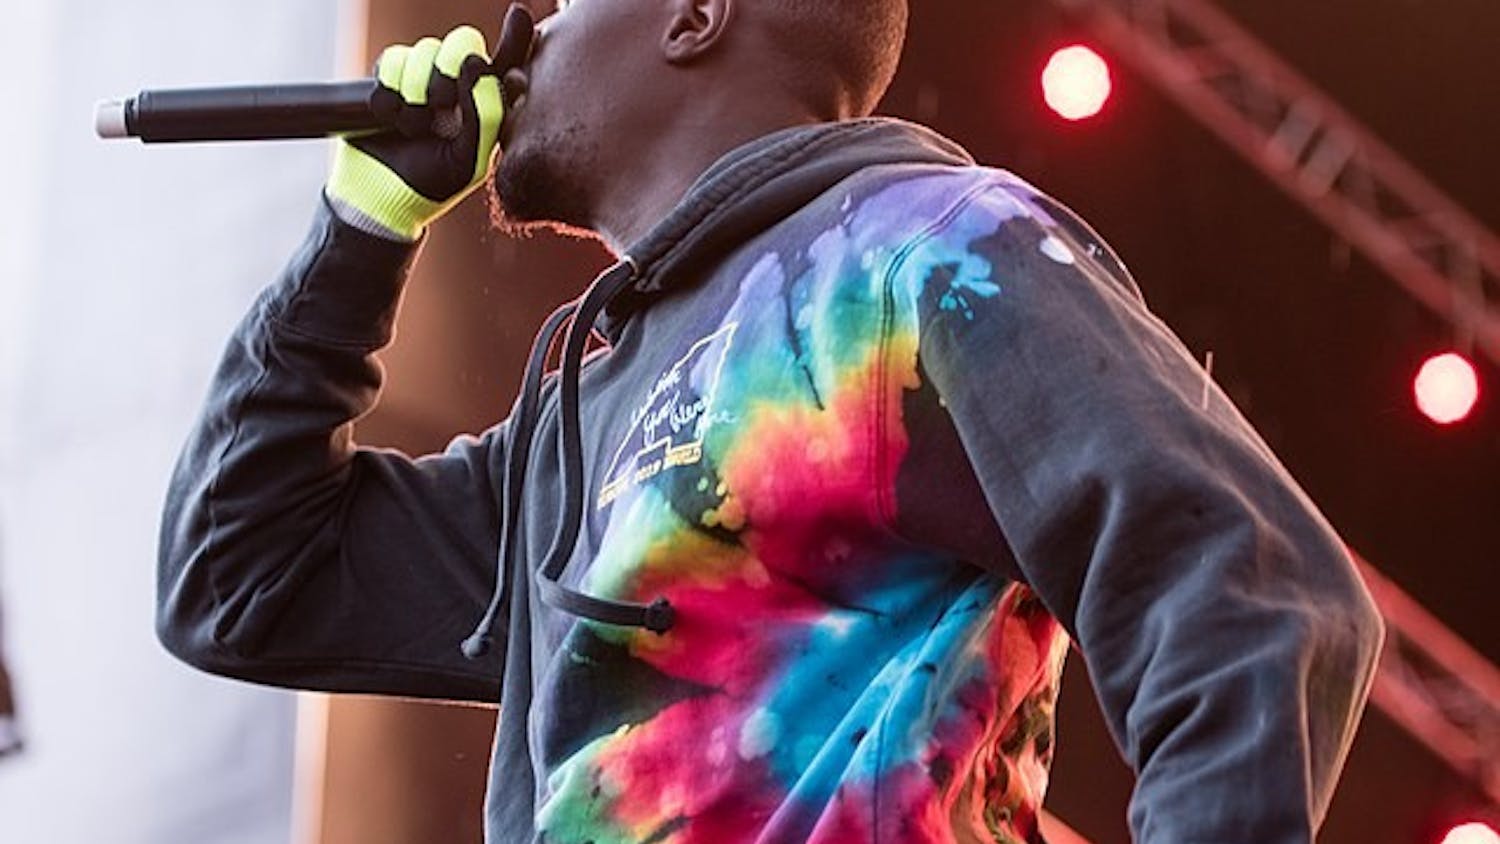 Sheck Wes, seen here performing at Openair Frauenfeld in 2019, is best known for his 2017 sleeper hit “Mo Bamba.”&nbsp;